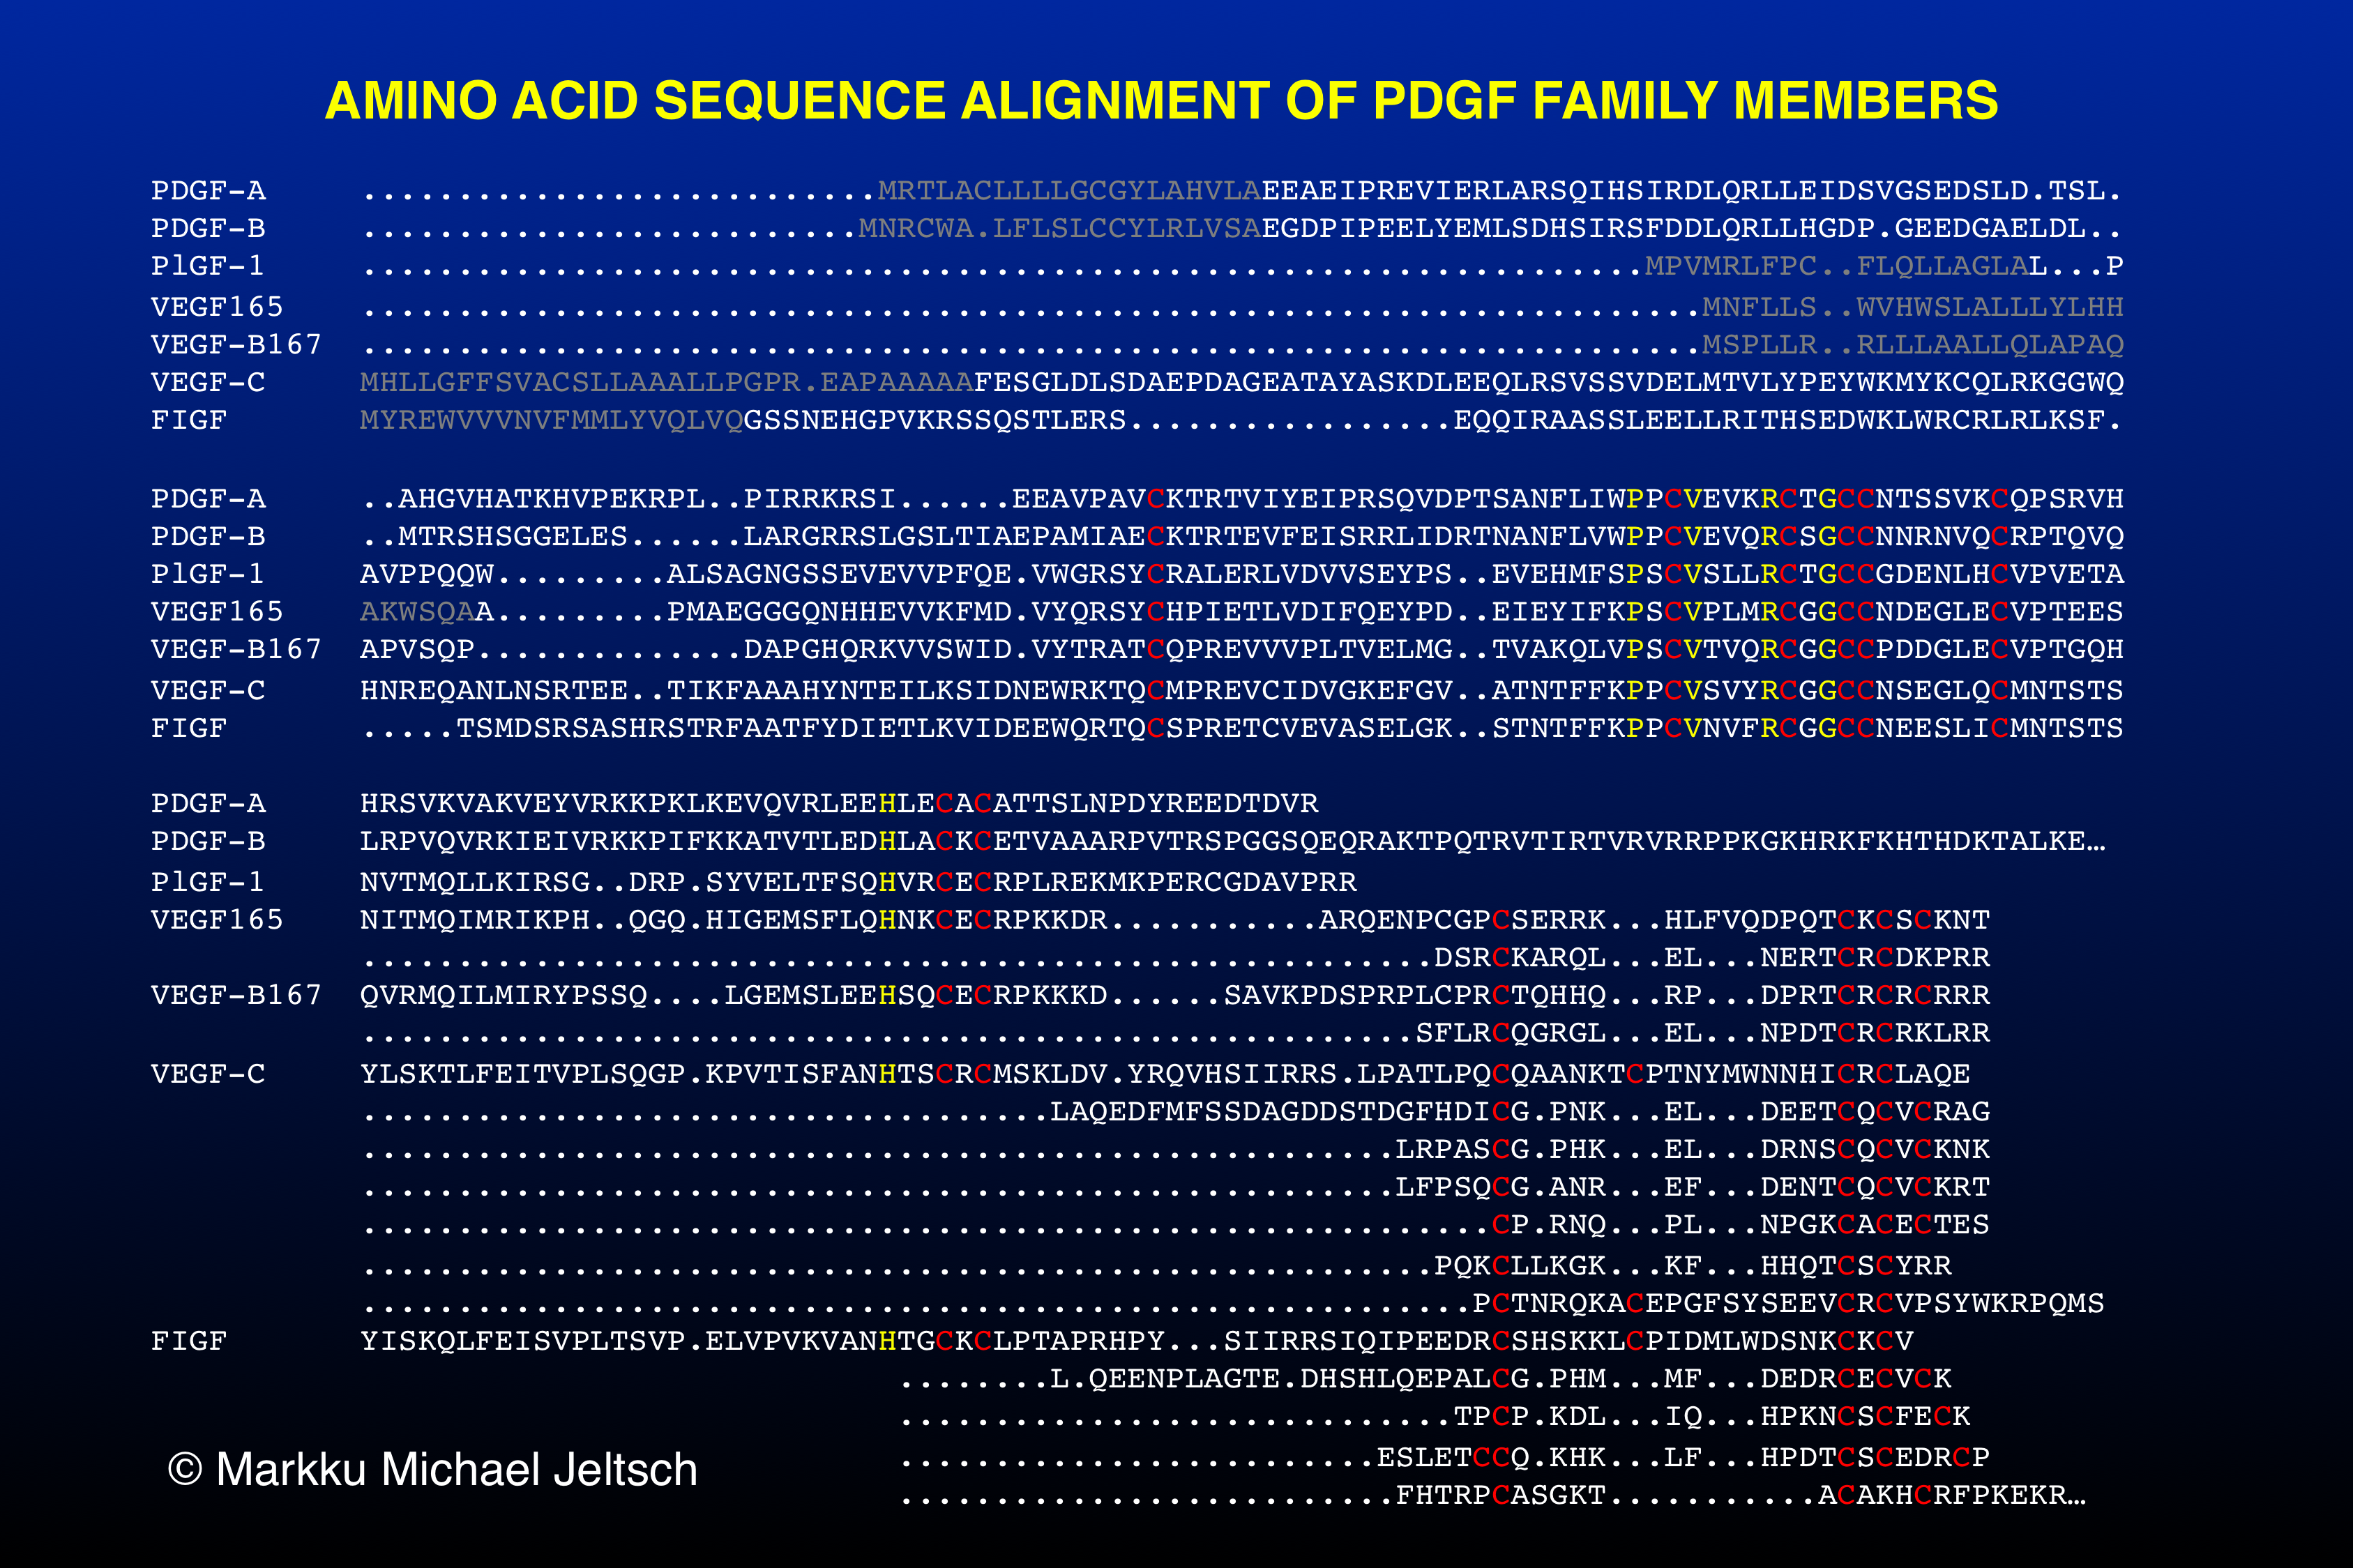 amino acid sequence alignment of PDGF family members